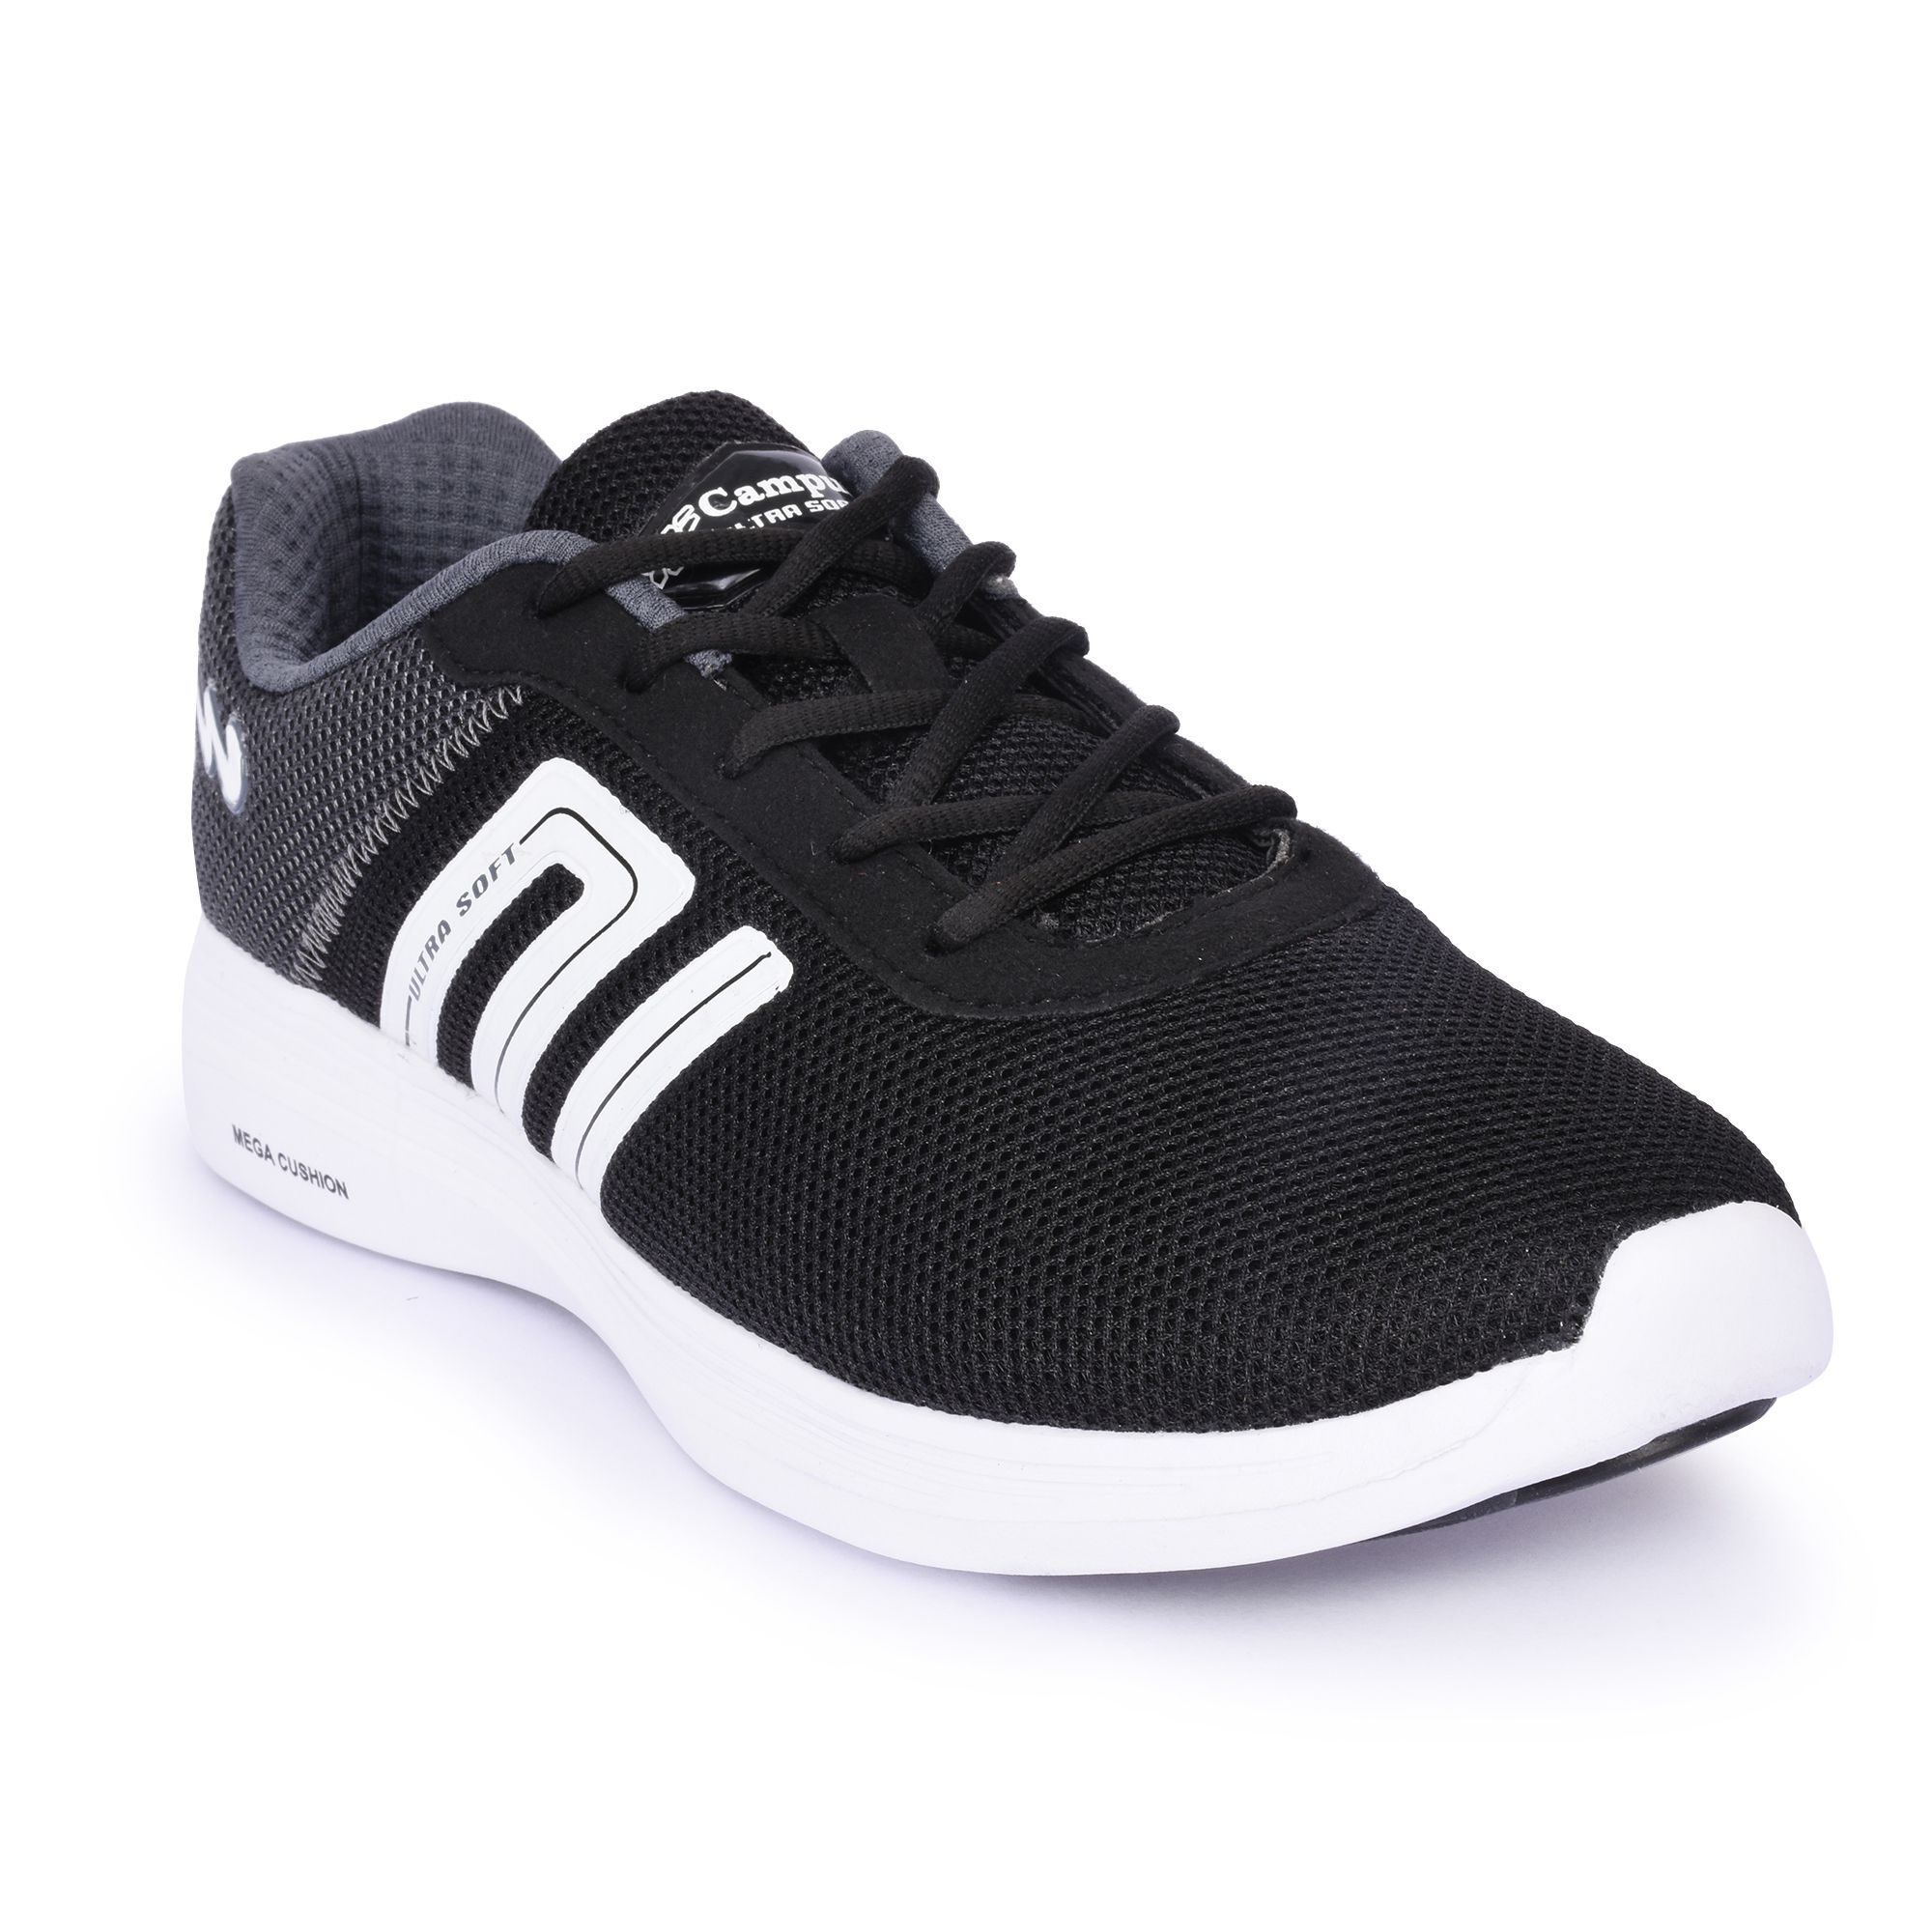 Campus DUSTER Black Running Shoes - Buy 